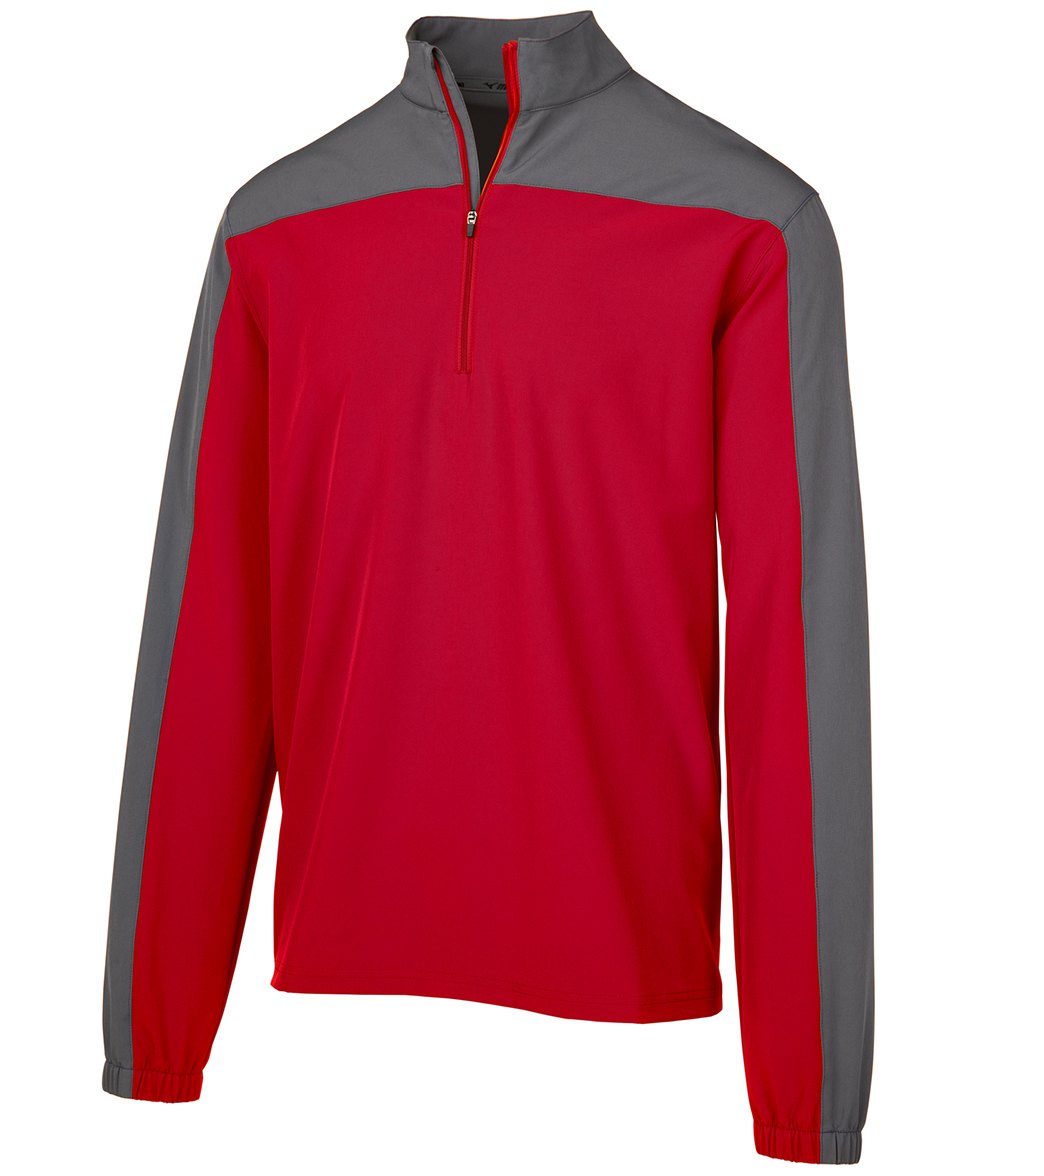 Mizuno Men's Comp Long Sleeve Batting Jacket - Red-Shade Large Red/Shade - Swimoutlet.com